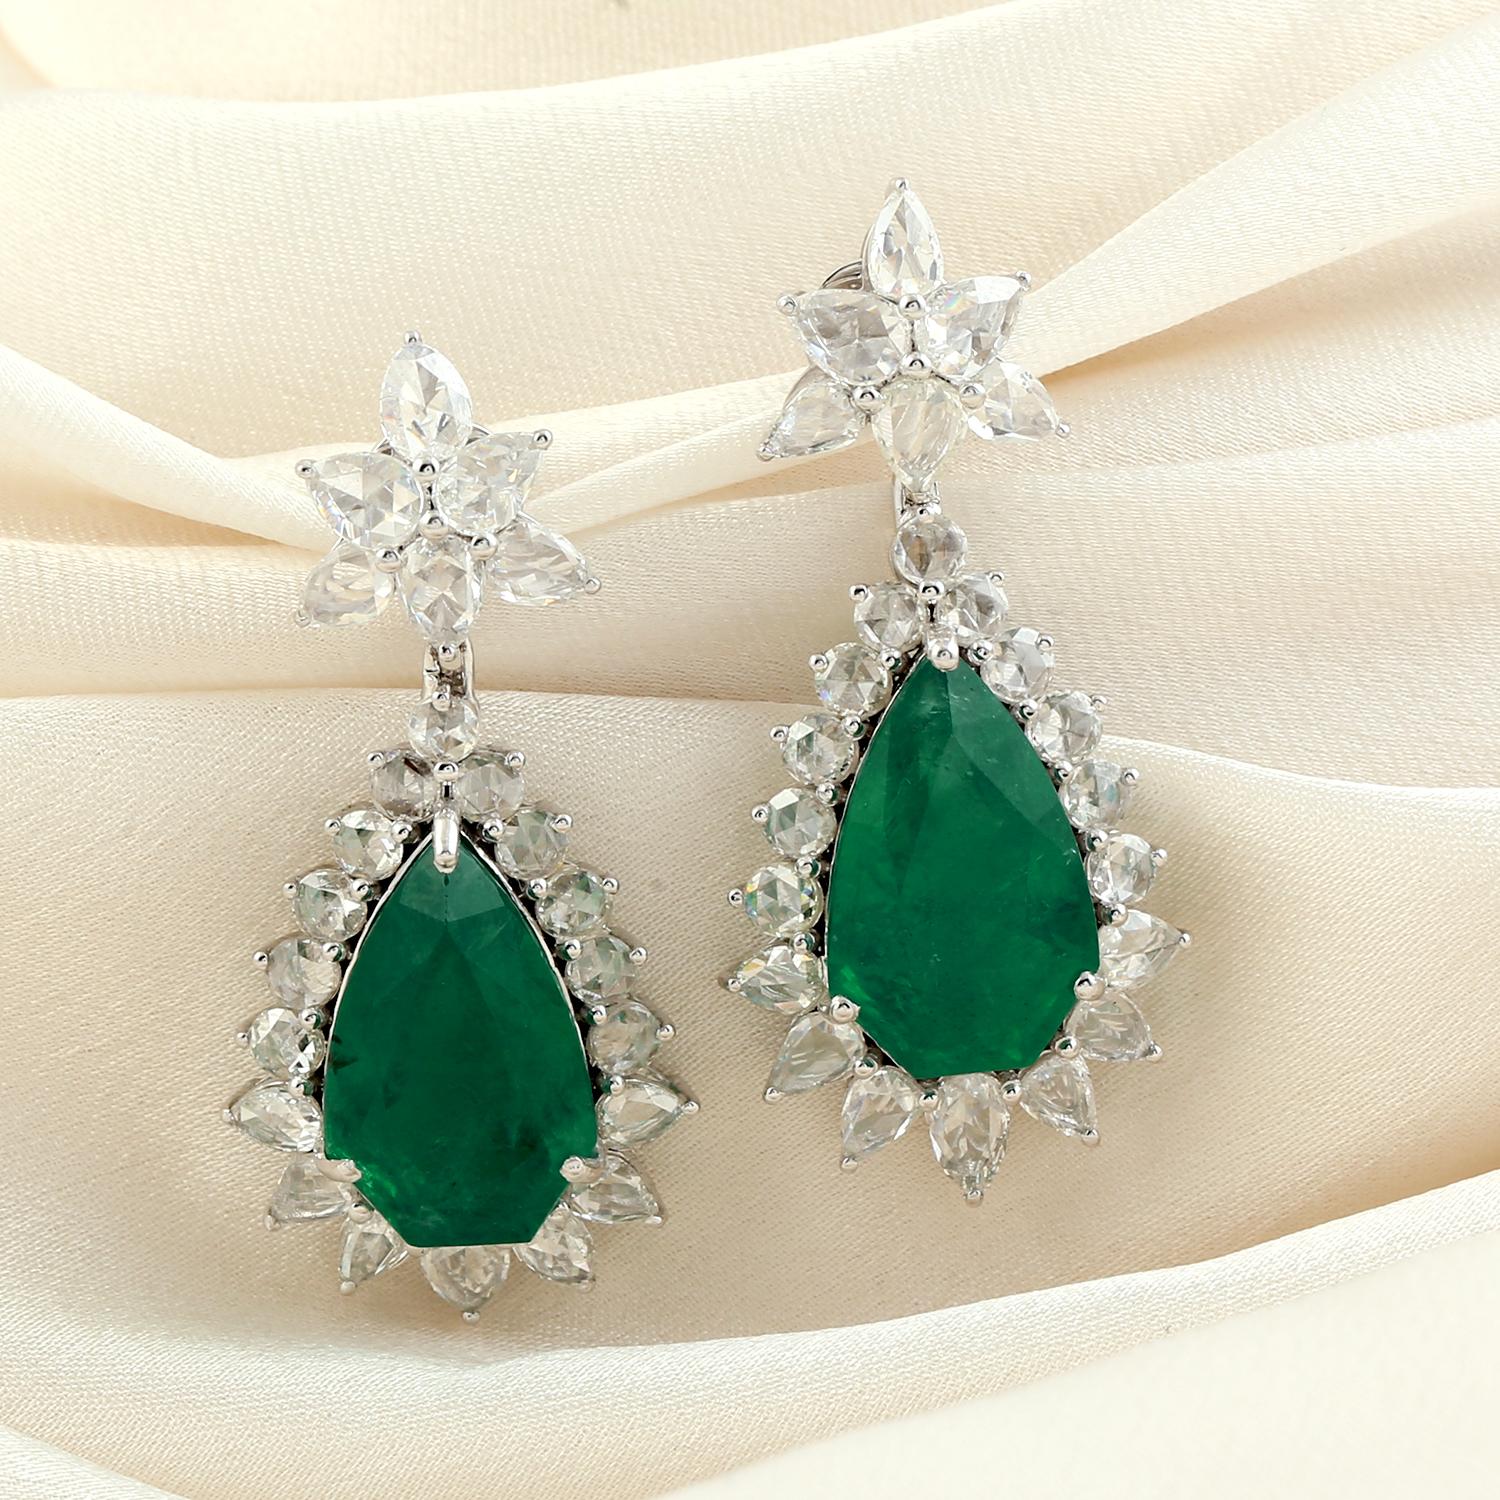 Contemporary 14.80ct Pear Shaped Emerald Dangle Earrings With Diamonds Made In 18k Gold For Sale